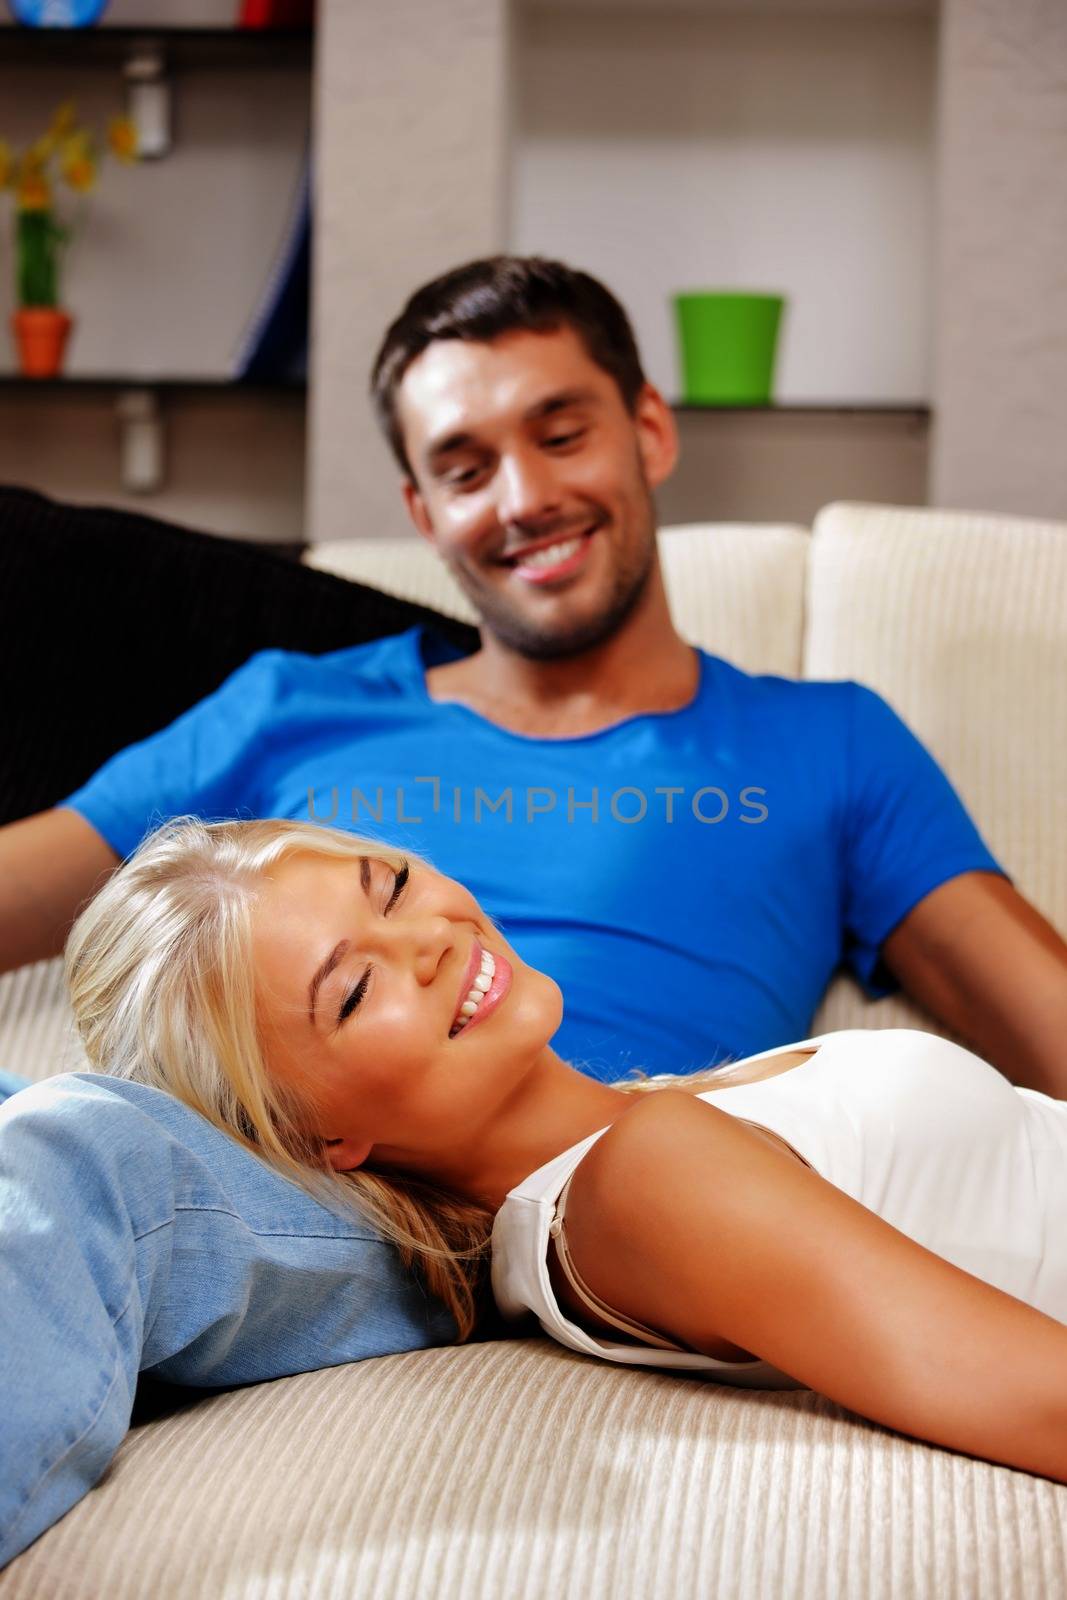 bright picture of happy romantic couple at home